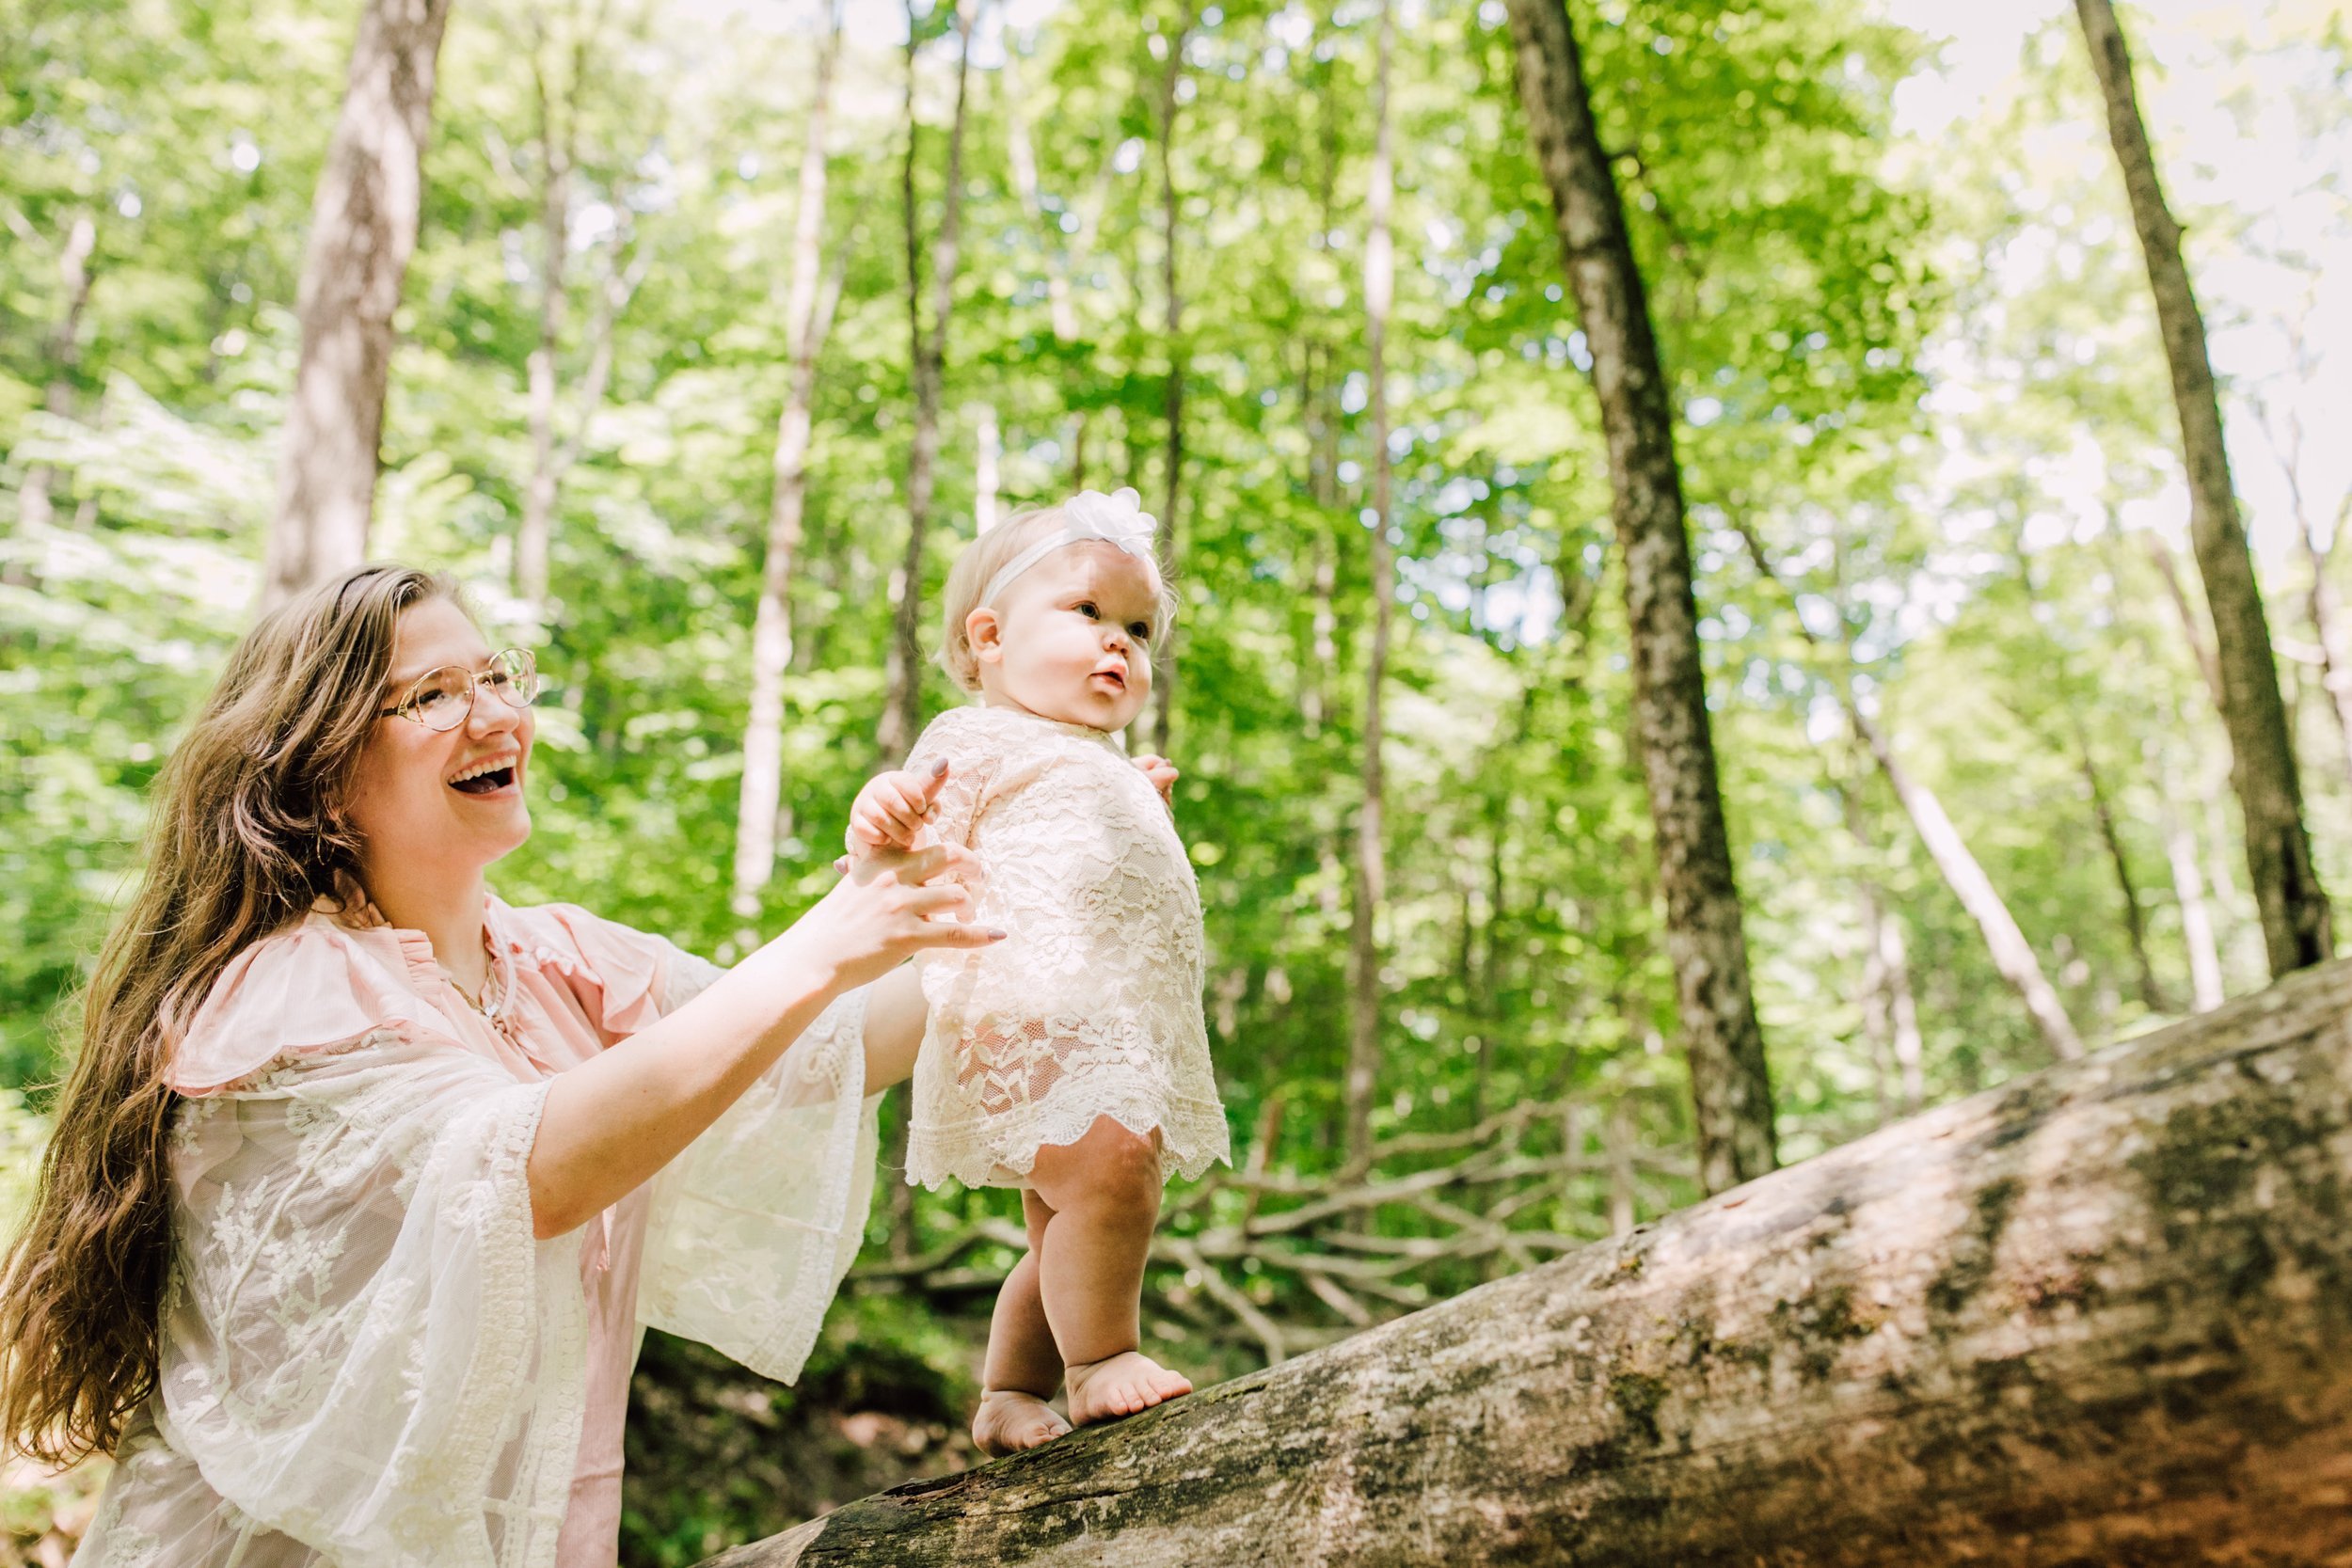  Mama helps her baby girl walk on a fallen tree during a family adventure 